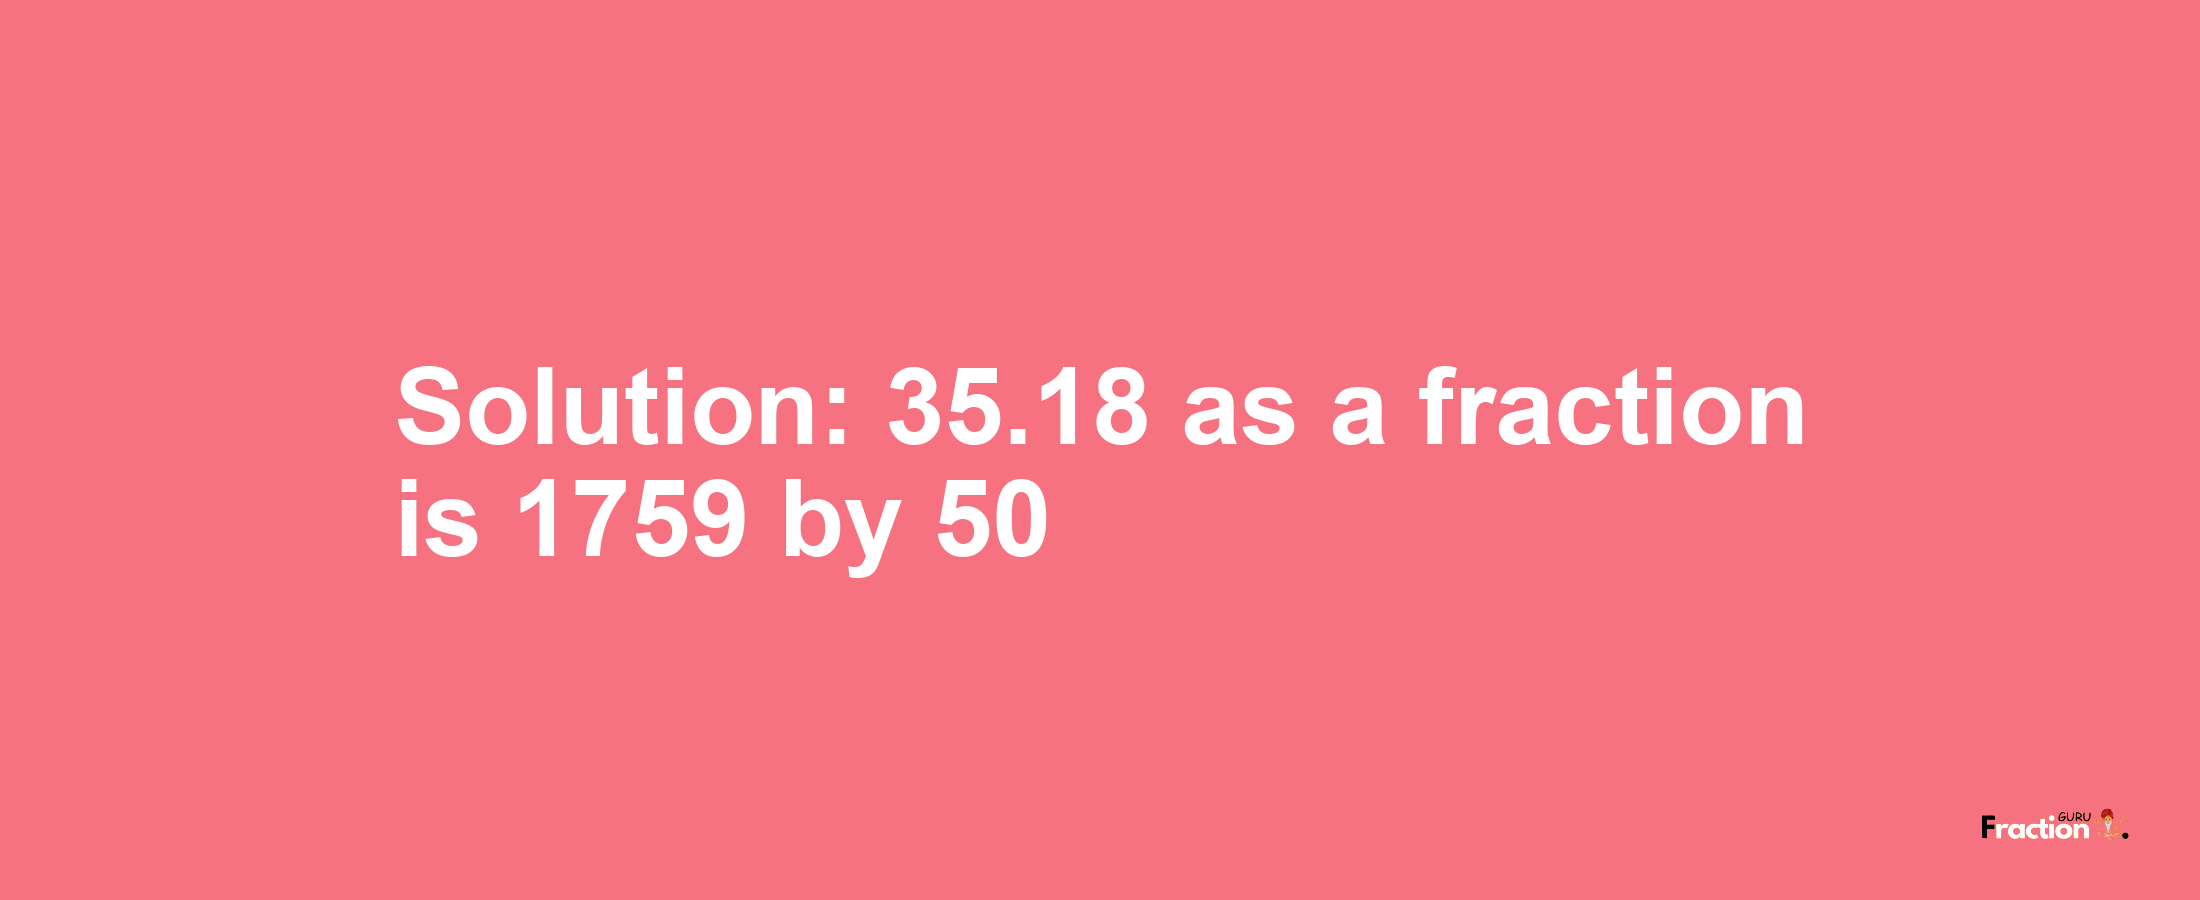 Solution:35.18 as a fraction is 1759/50